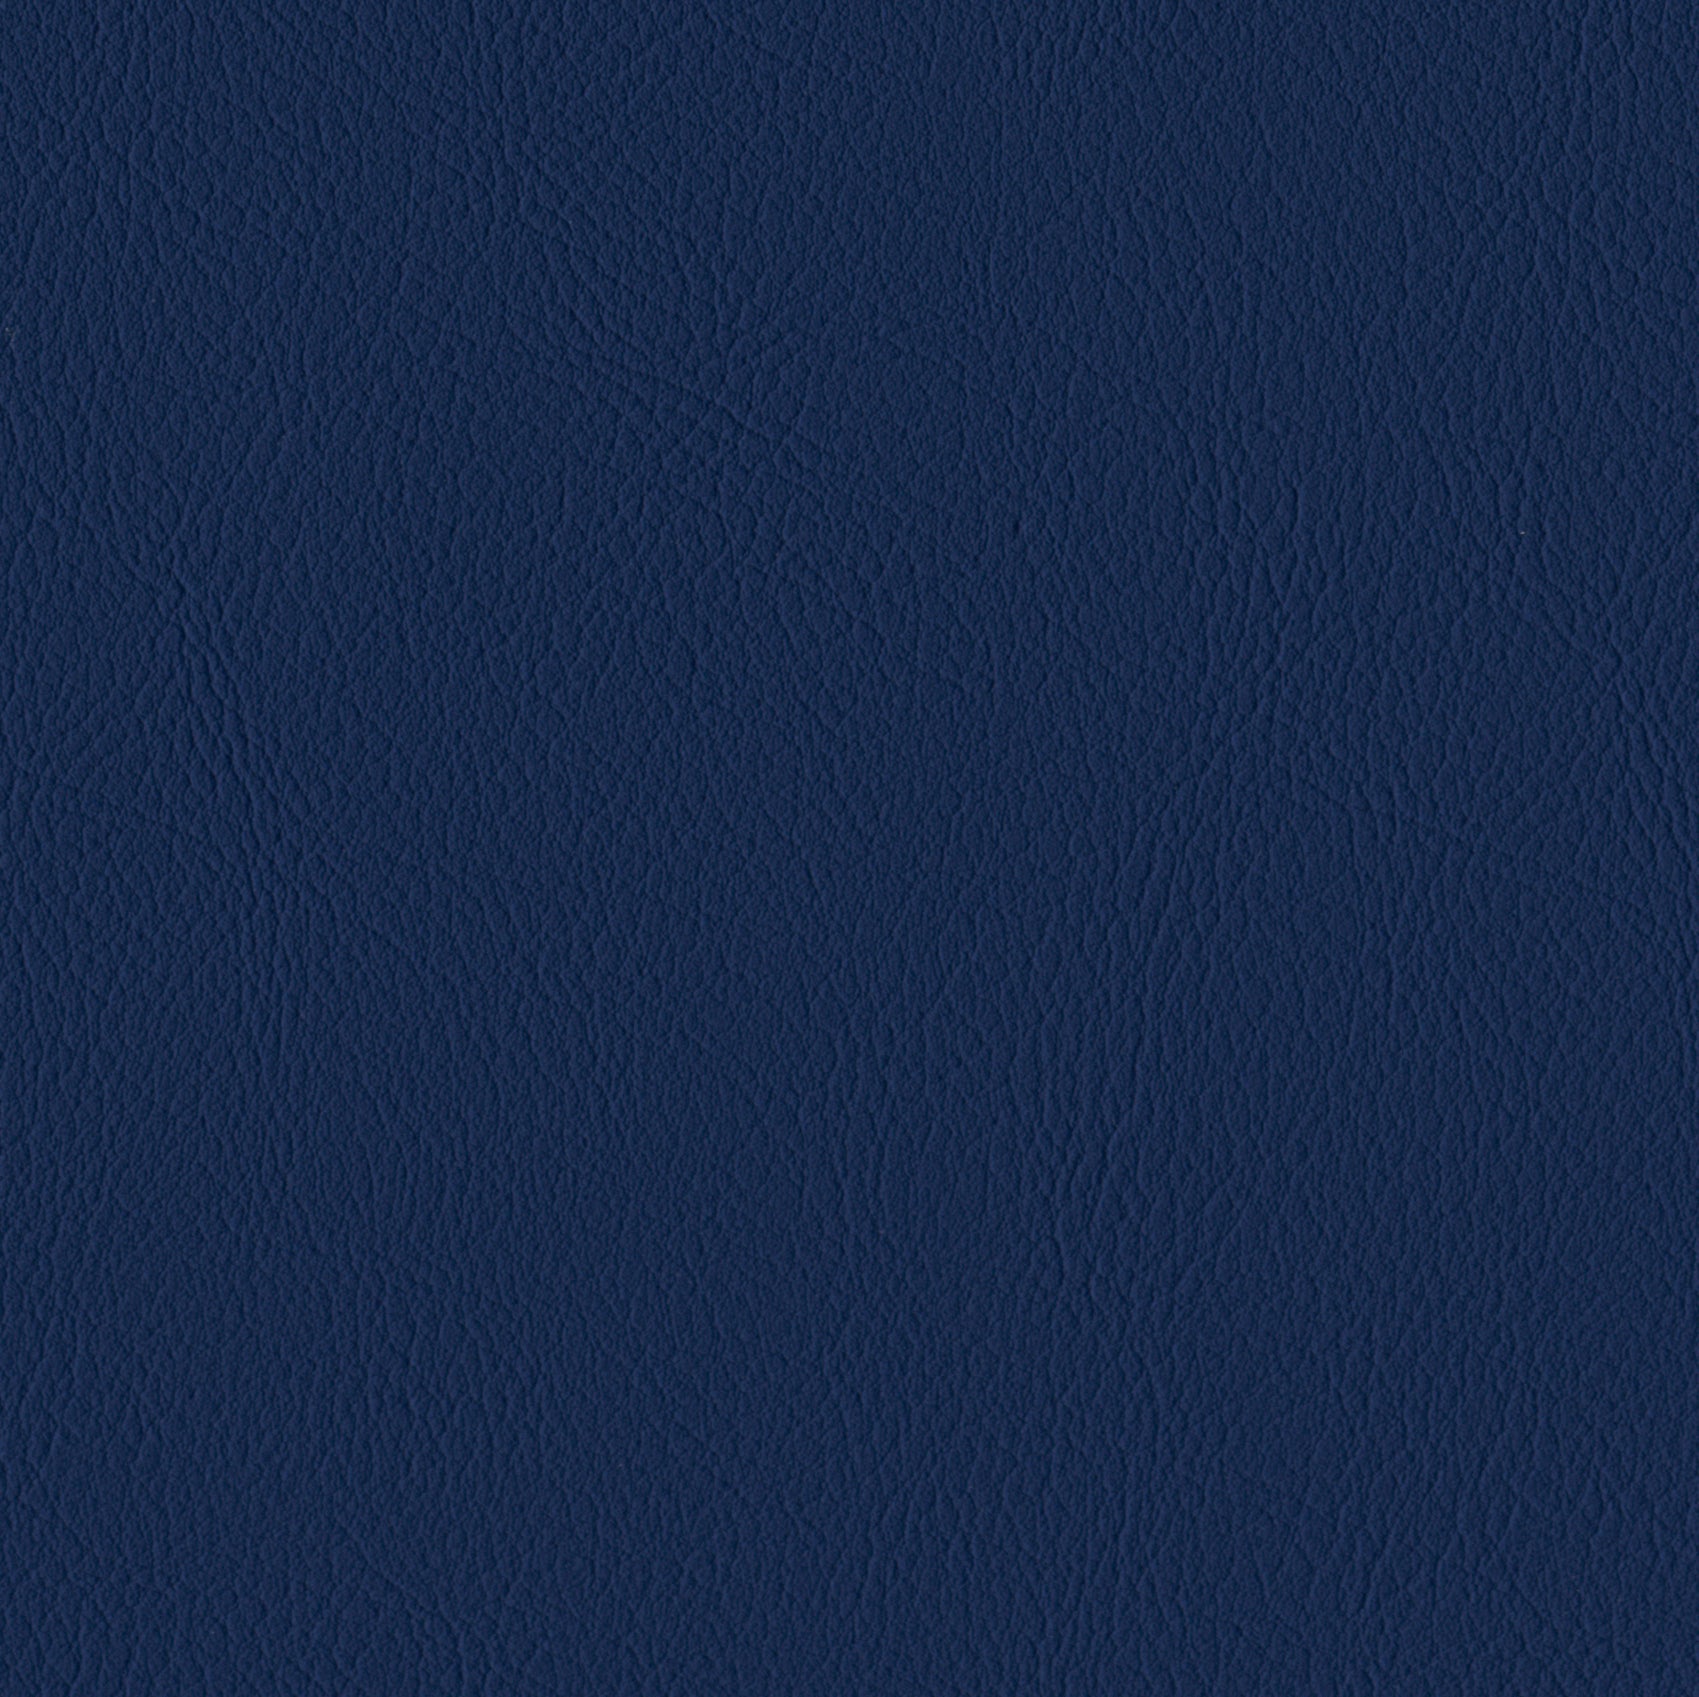     Andriali-Contract-Vinyl_Upholstery-Design-LegacyFR-Color-520MidnightBlue-Width-140cm